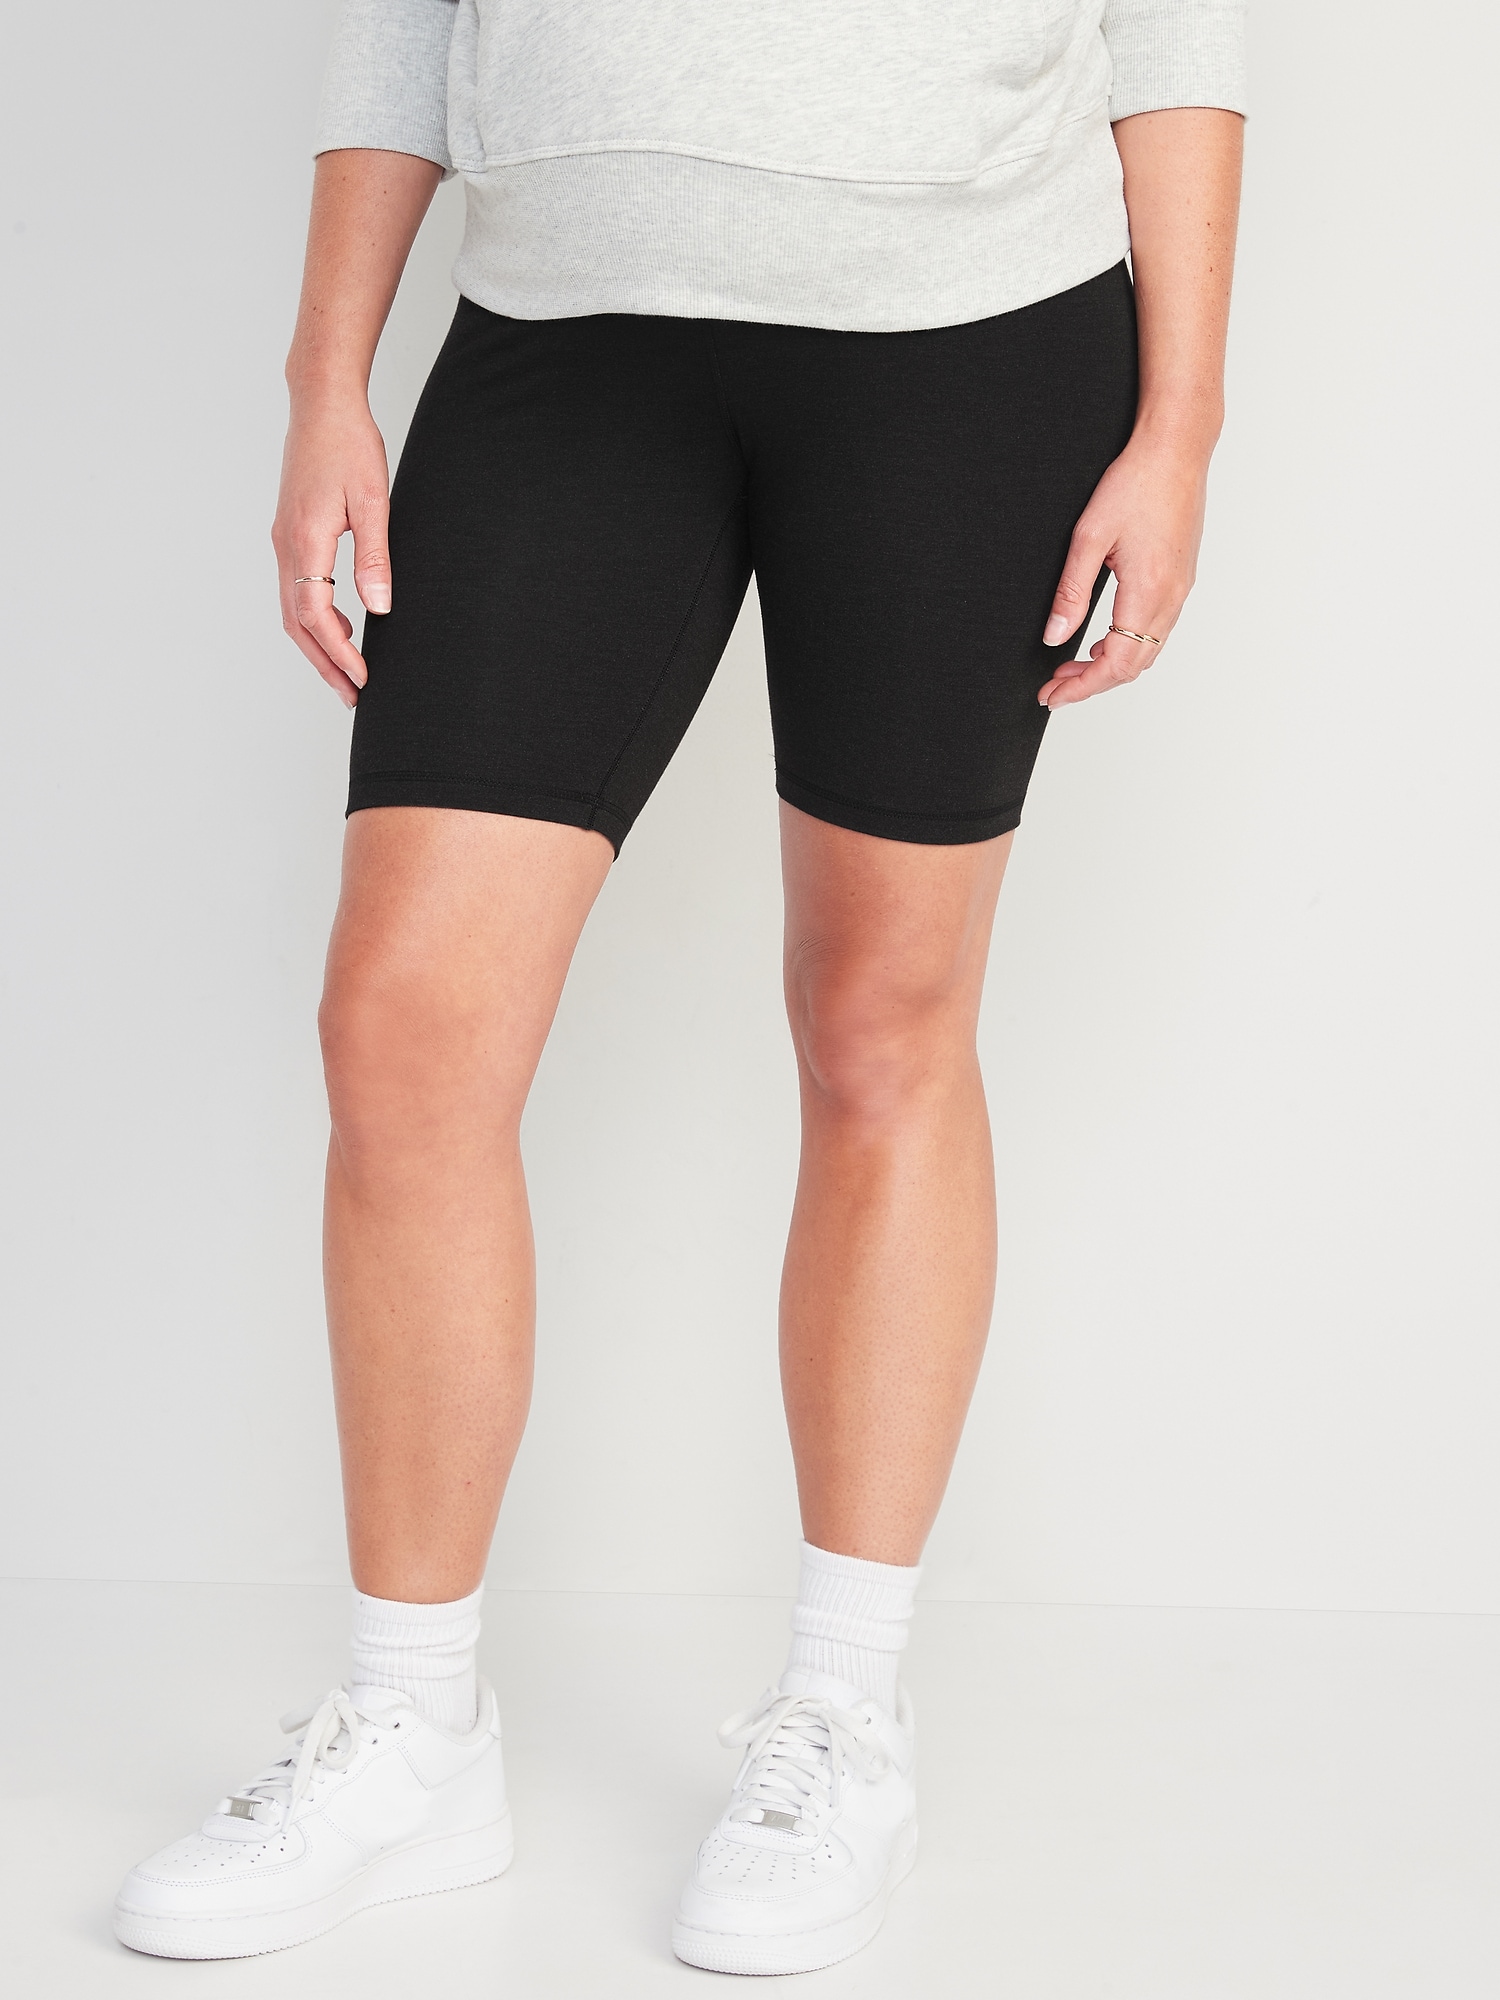 Buttergene Maternity Shorts Maternity Biker Shorts Over The Belly Pregnancy  Shorts Athletic Active Shorts Pants with Pockets Navy Blue - Yahoo Shopping